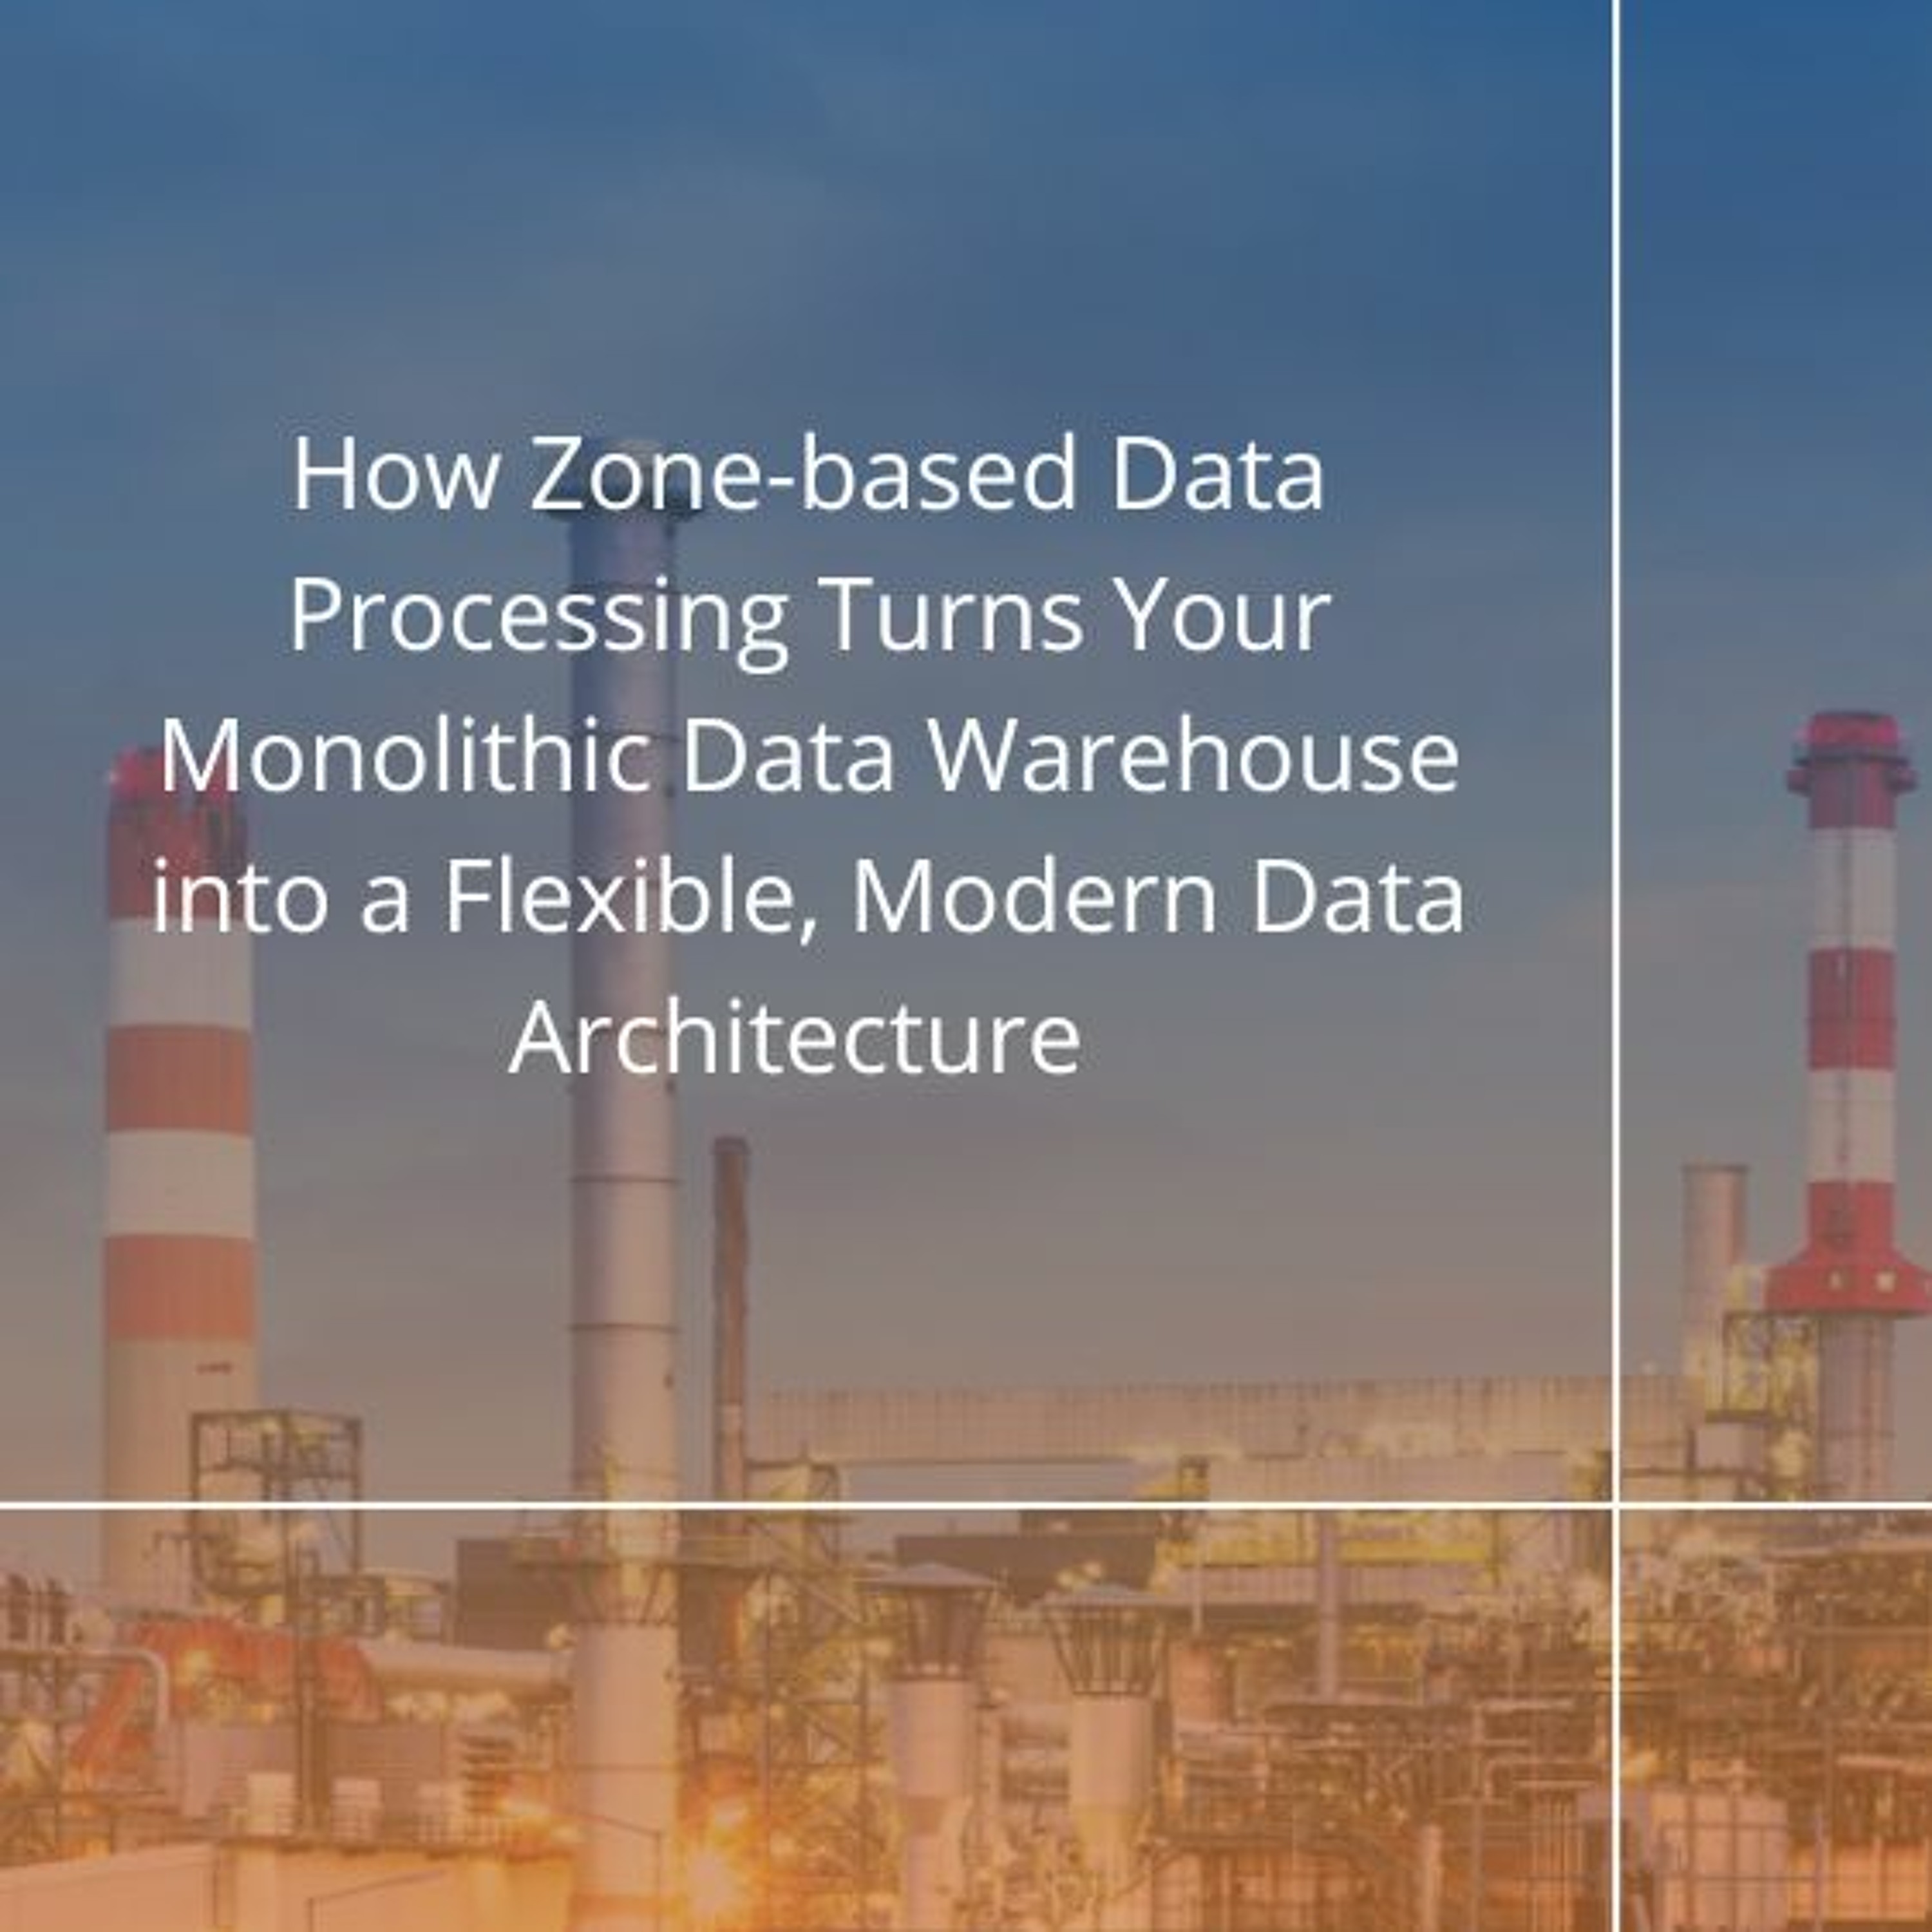 How Zone-based Data Processing Turns Your Monolithic DW into a Modern Data Architecture - Audio Blog